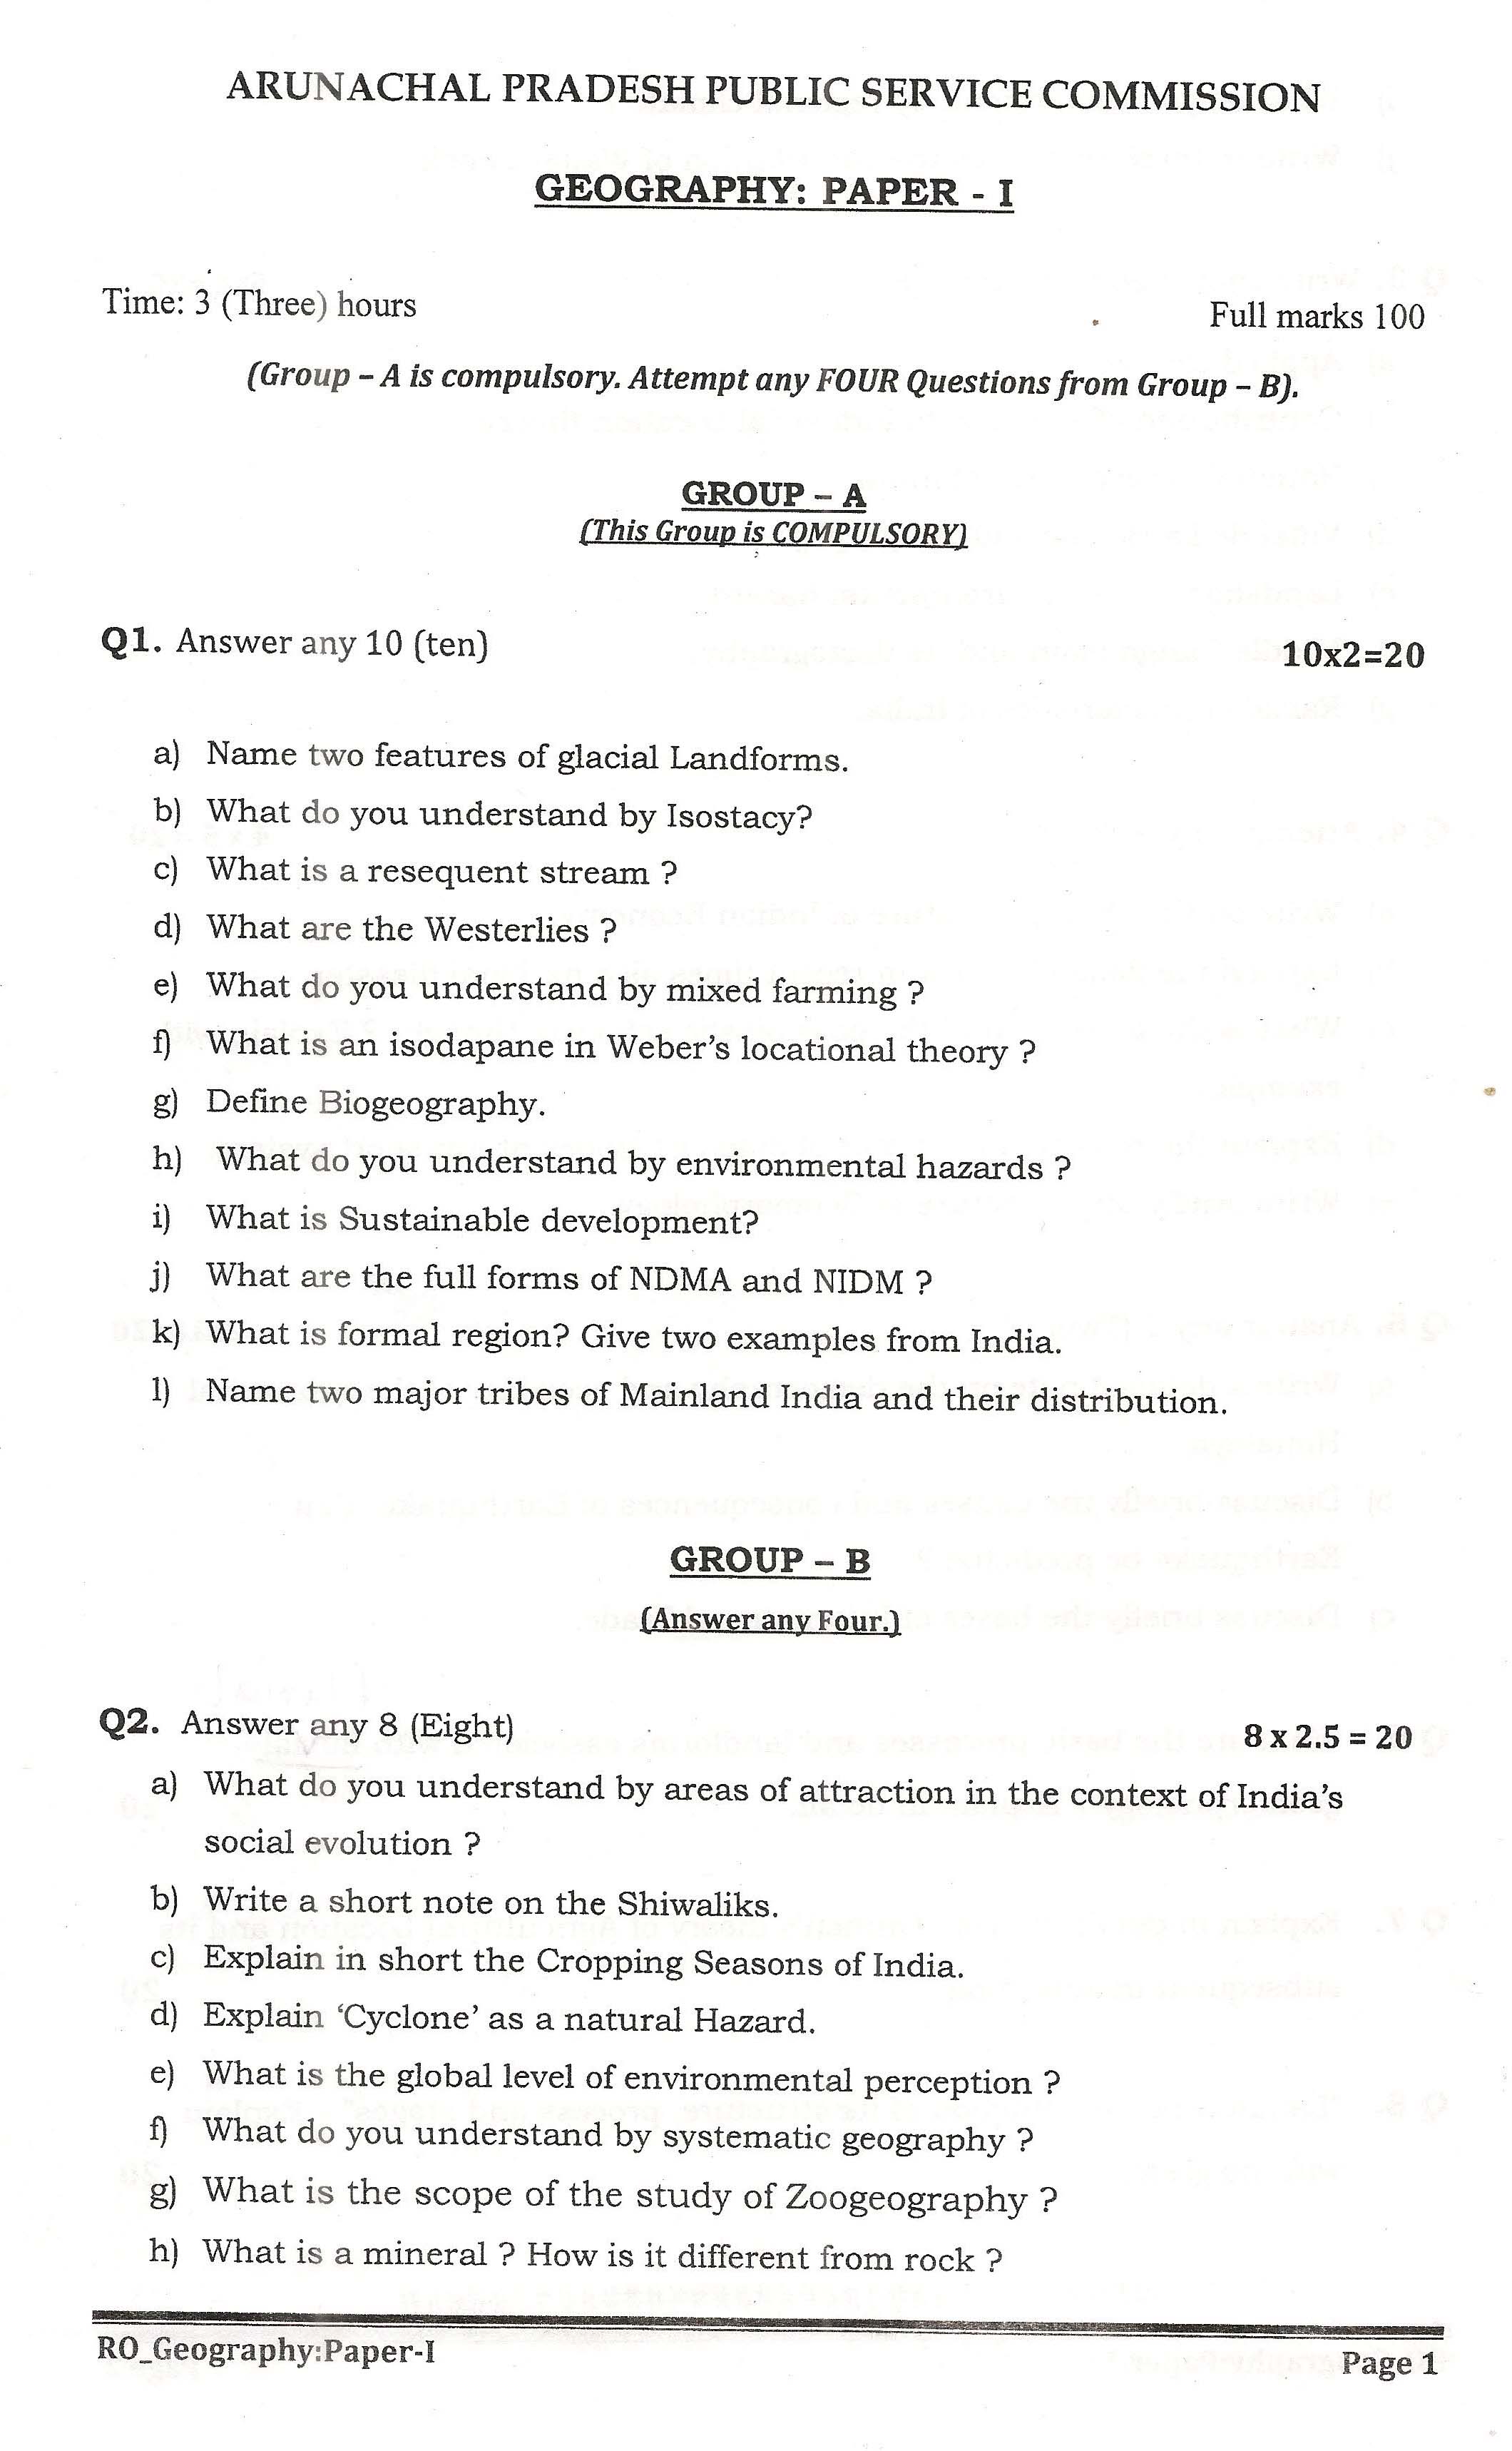 APPSC Research Officer Geography Paper I Exam Question Paper 2014 1